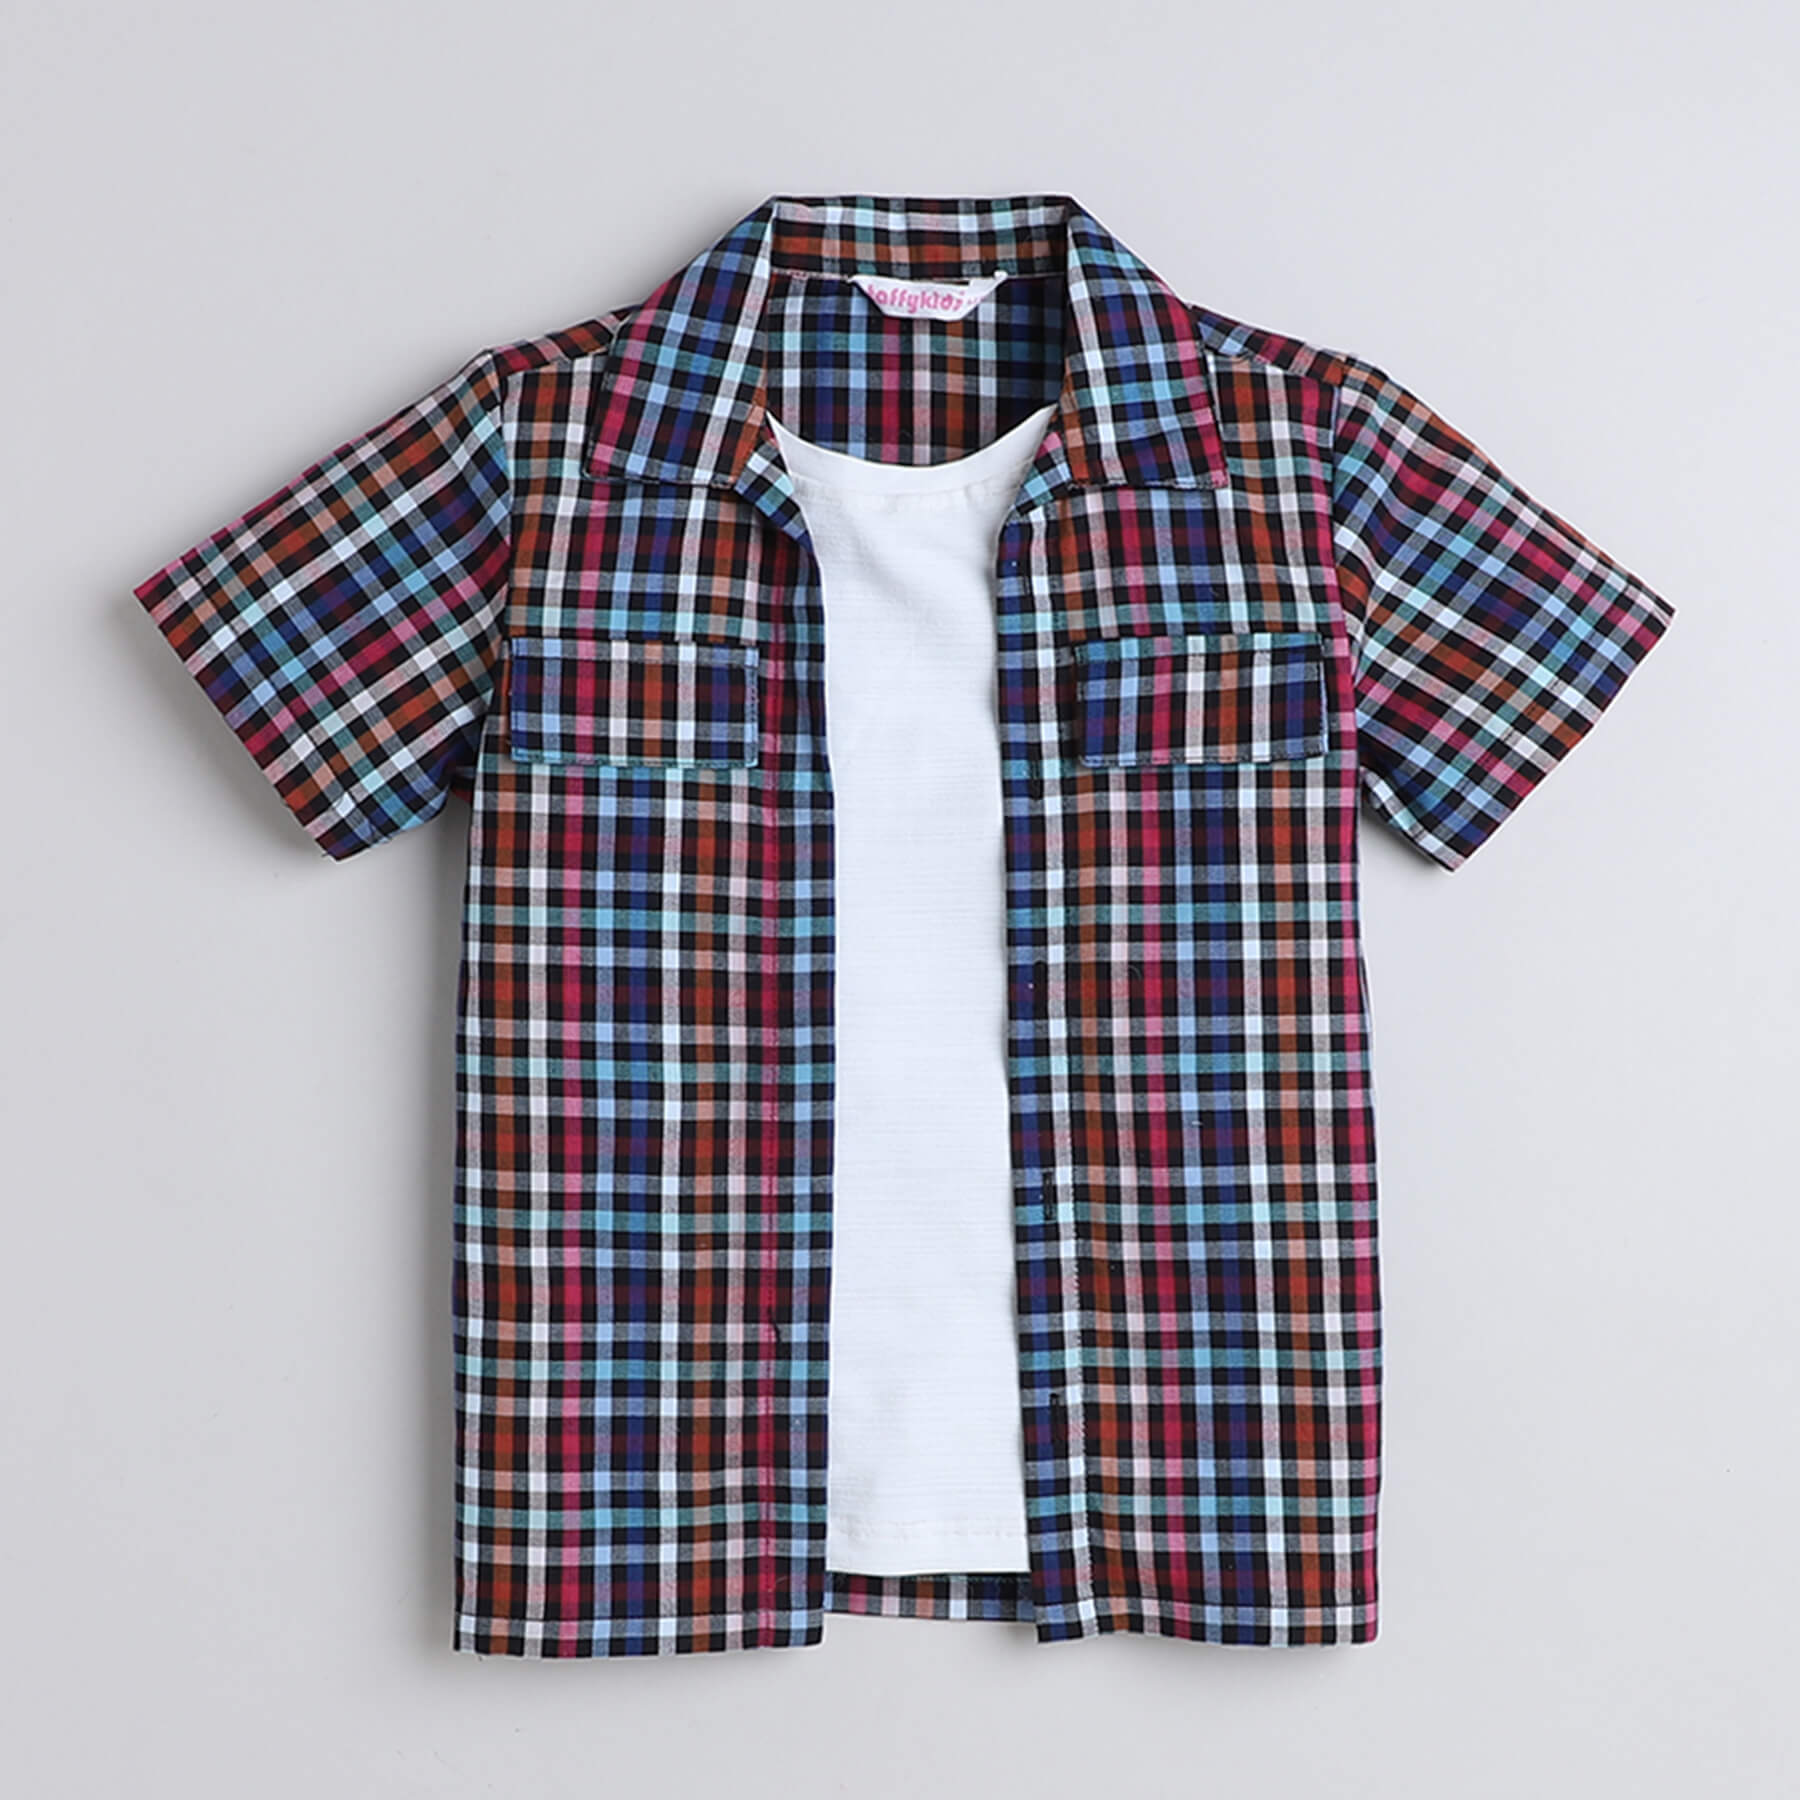 Taffykids yarn dyed checks half sleeves shirt with attached tee and solid pant set-Multi